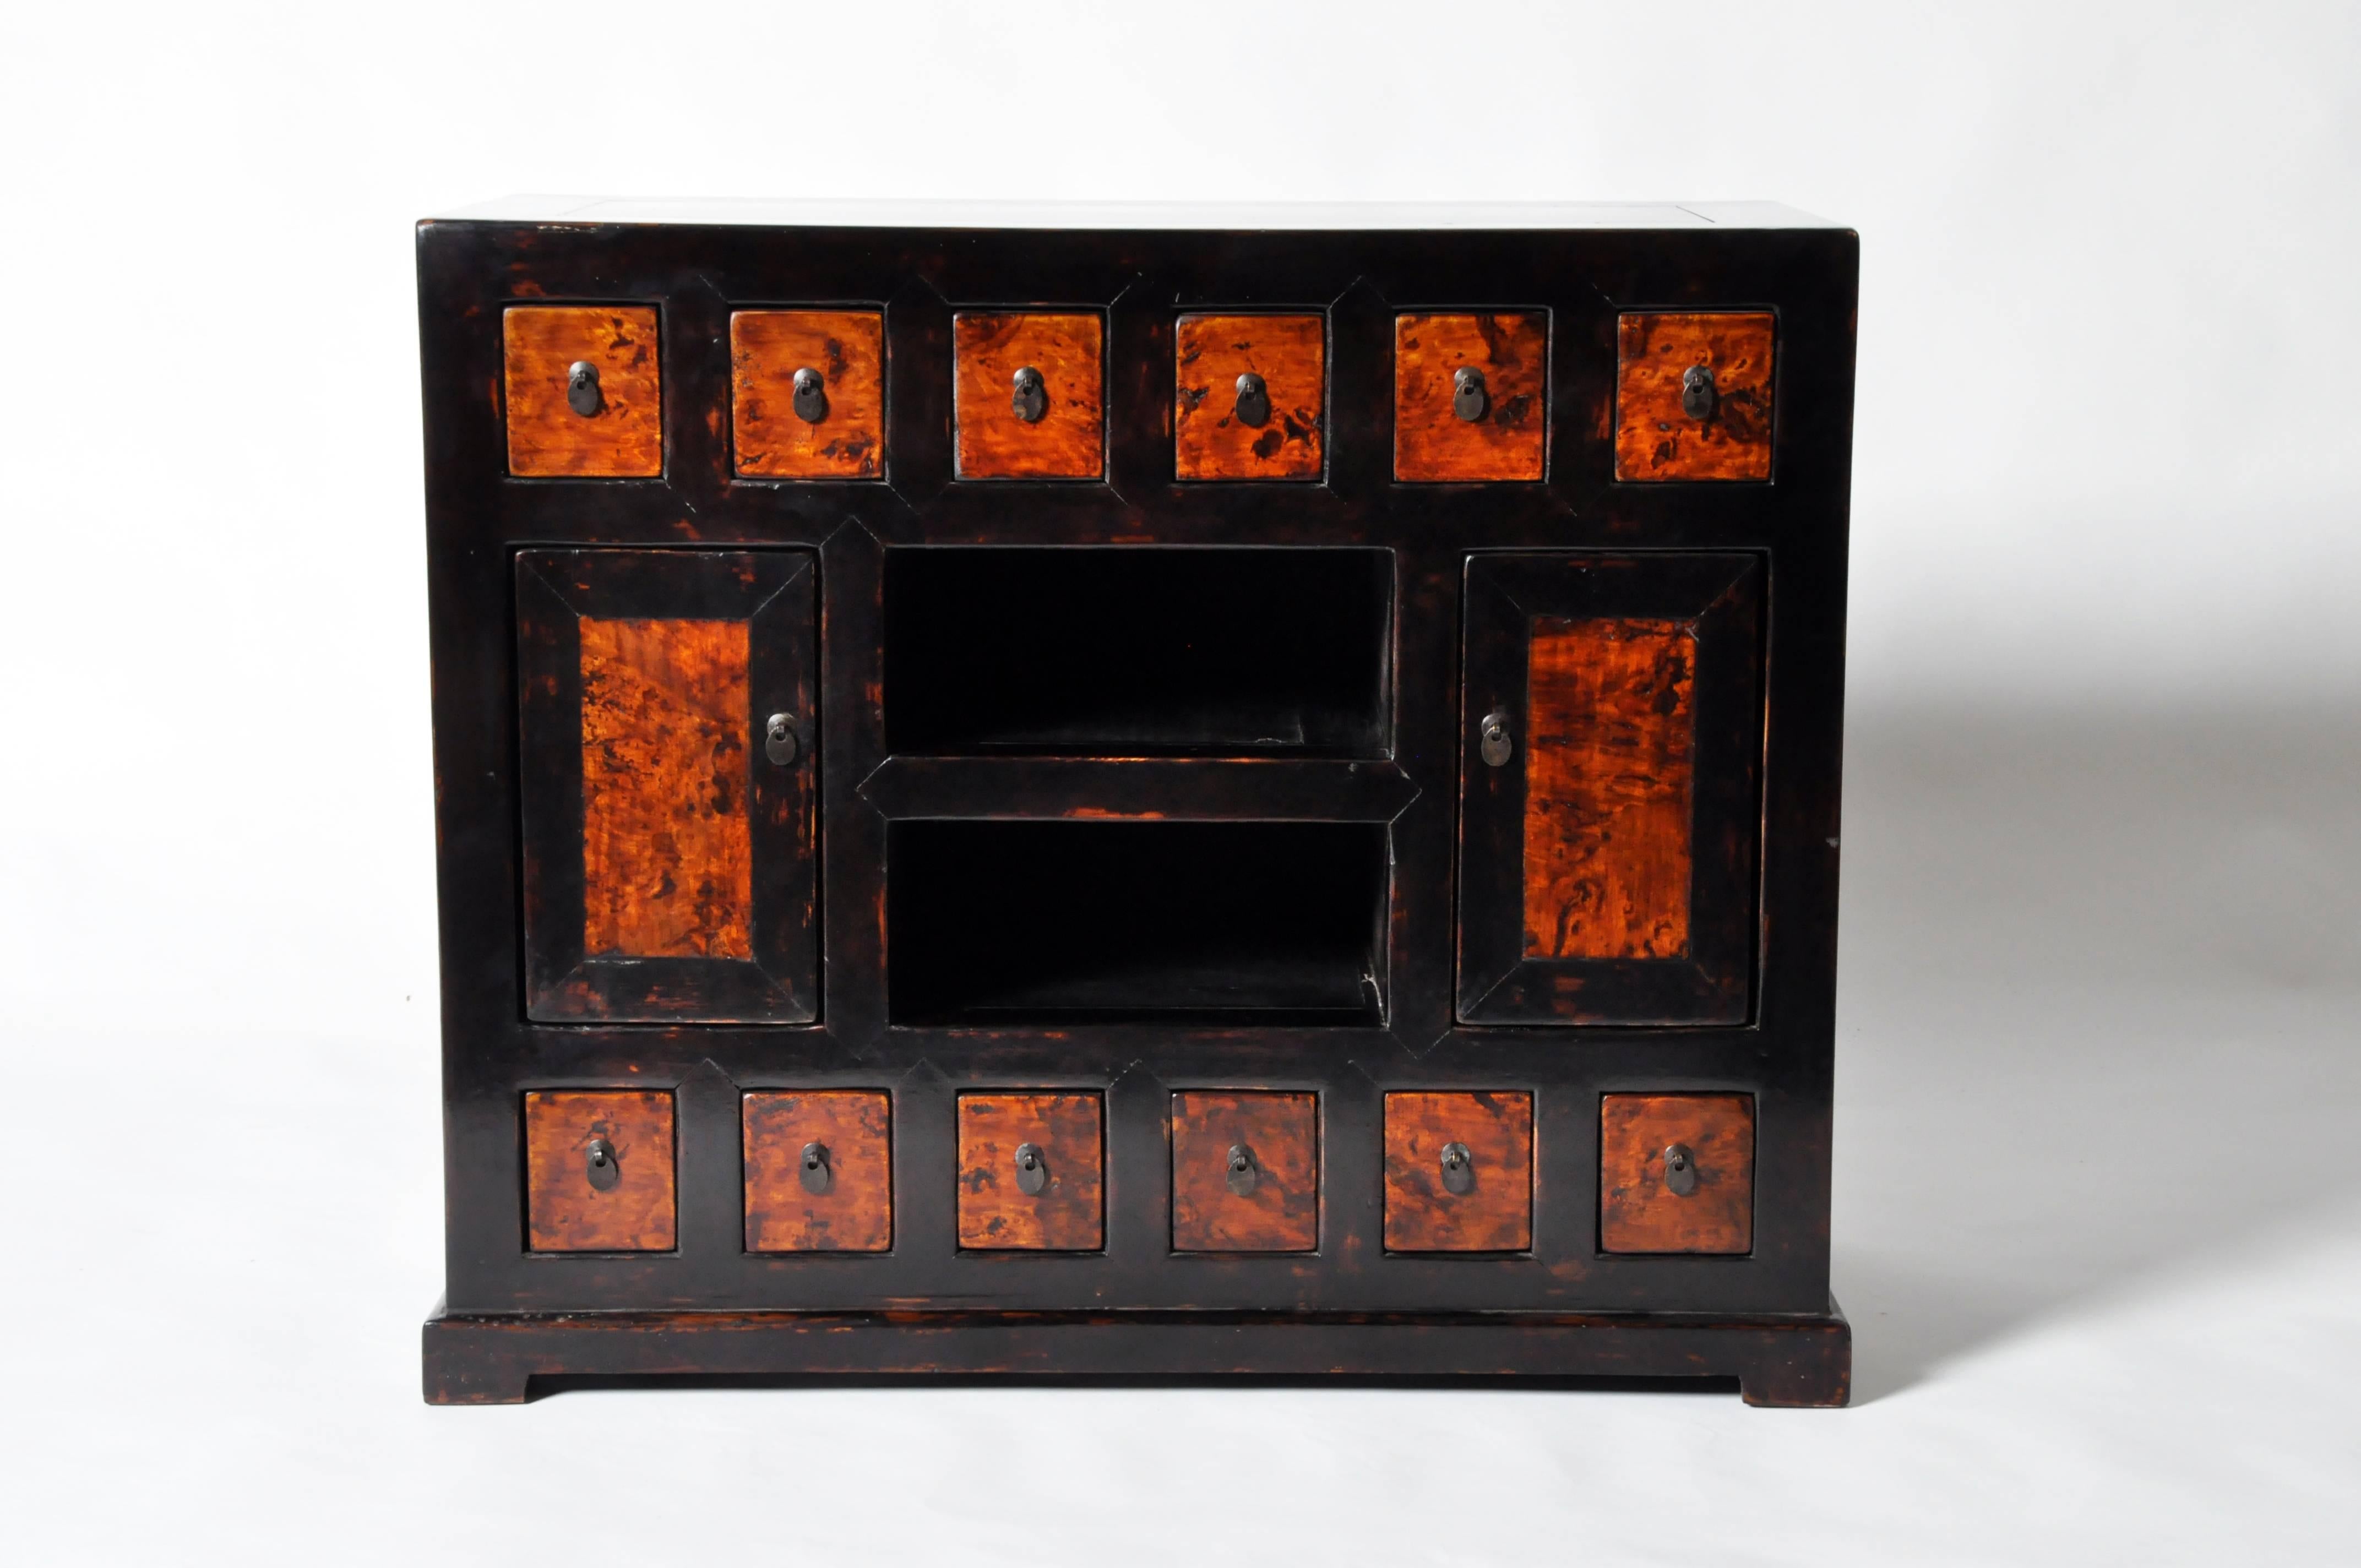 This Chinese Medicine chest is made from elmwood and has been fully restored. It features two display shelves and 12 drawers for ample storage.